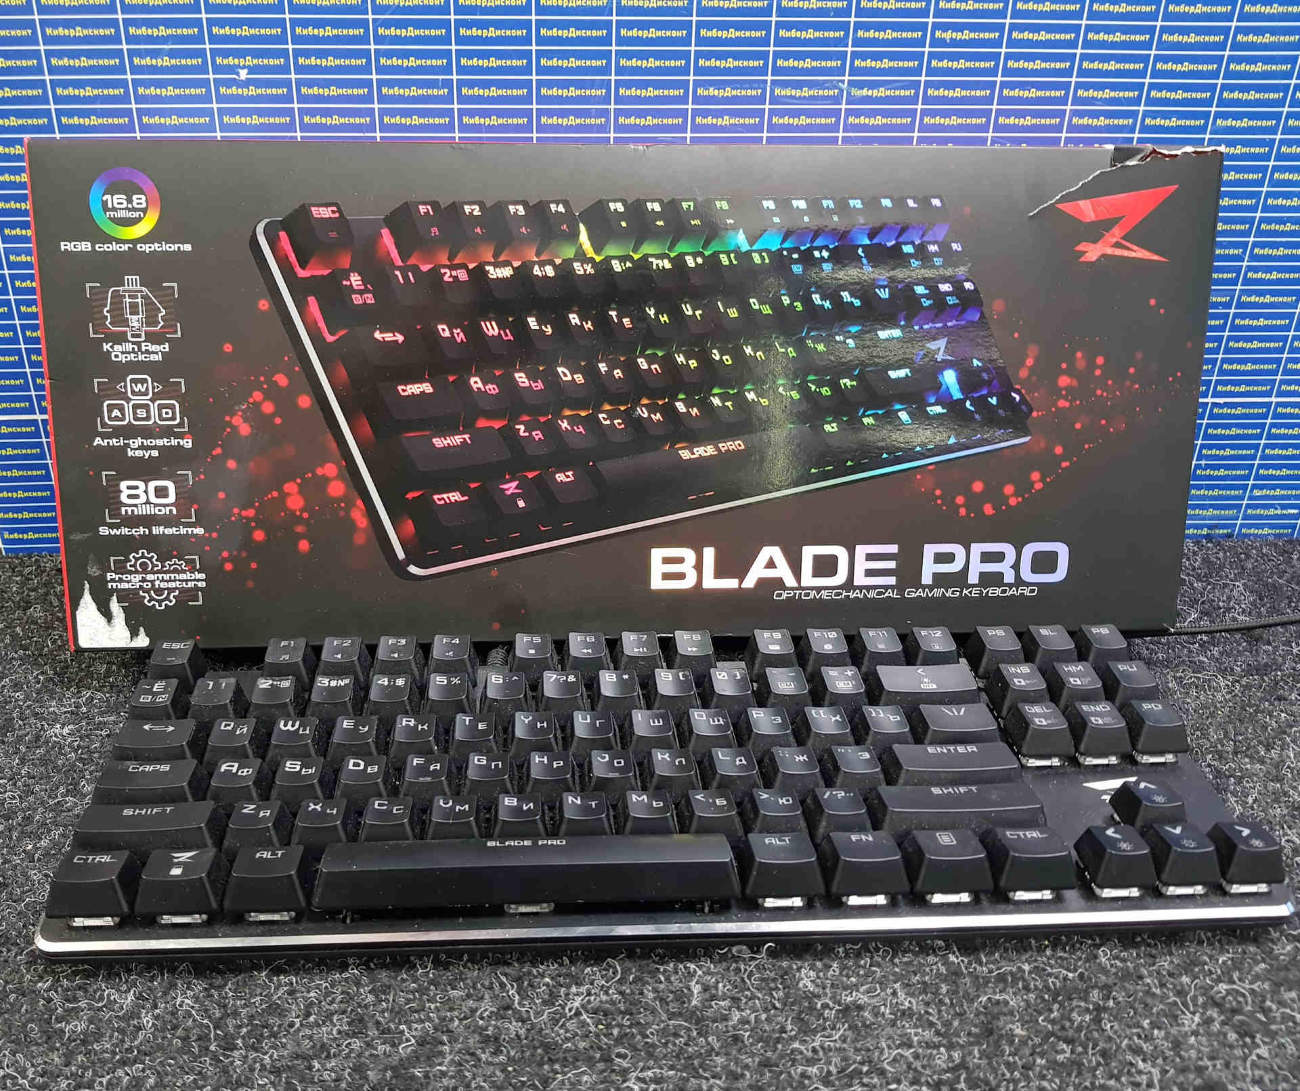 Zet gaming kailh red. Клавиатура zet Blade Pro Kailh Red. Клавиатура zet Blade k180. Клавиатура Blade zet механическая. Клавиатура Zed Blade Pro.